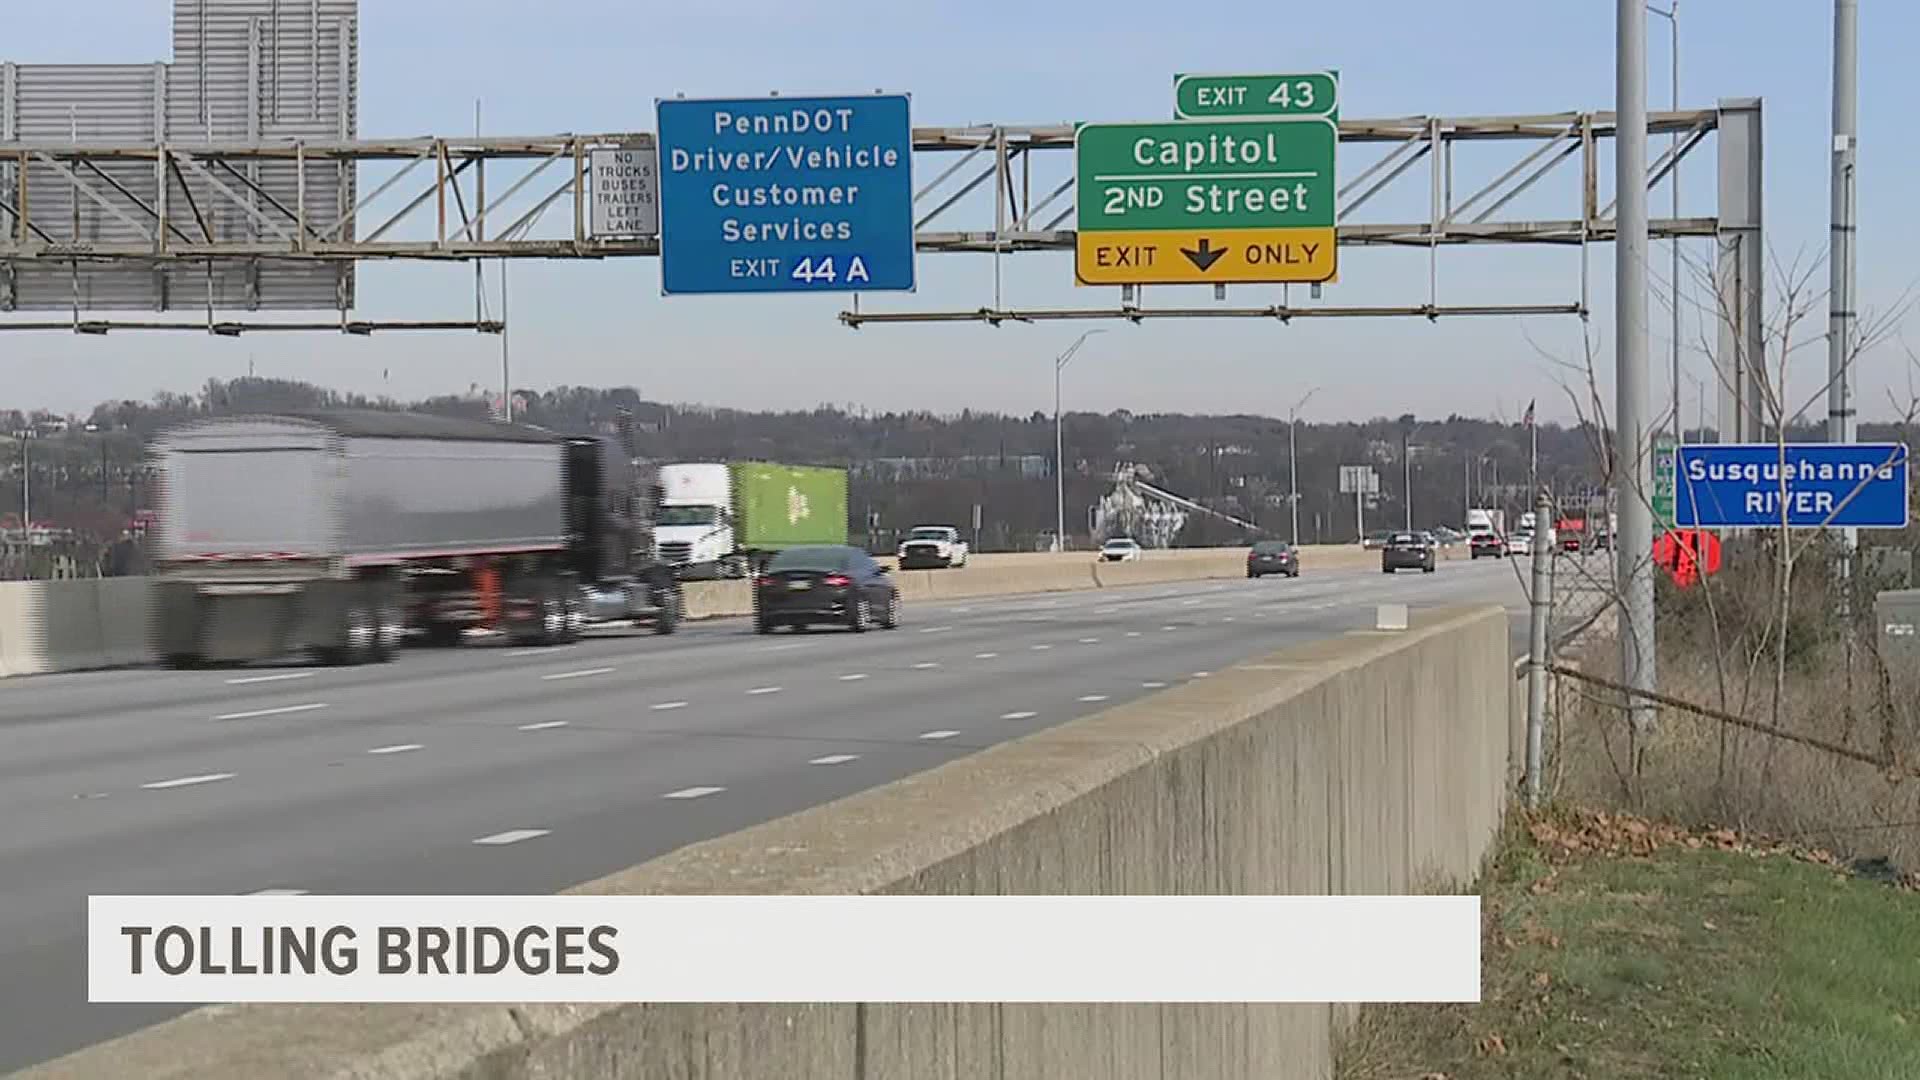 The plan includes tolling 9 bridges, with the I-83 John Harris Memorial South bridge among those slated for repairs that connects Harrisburg to Cumberland County.